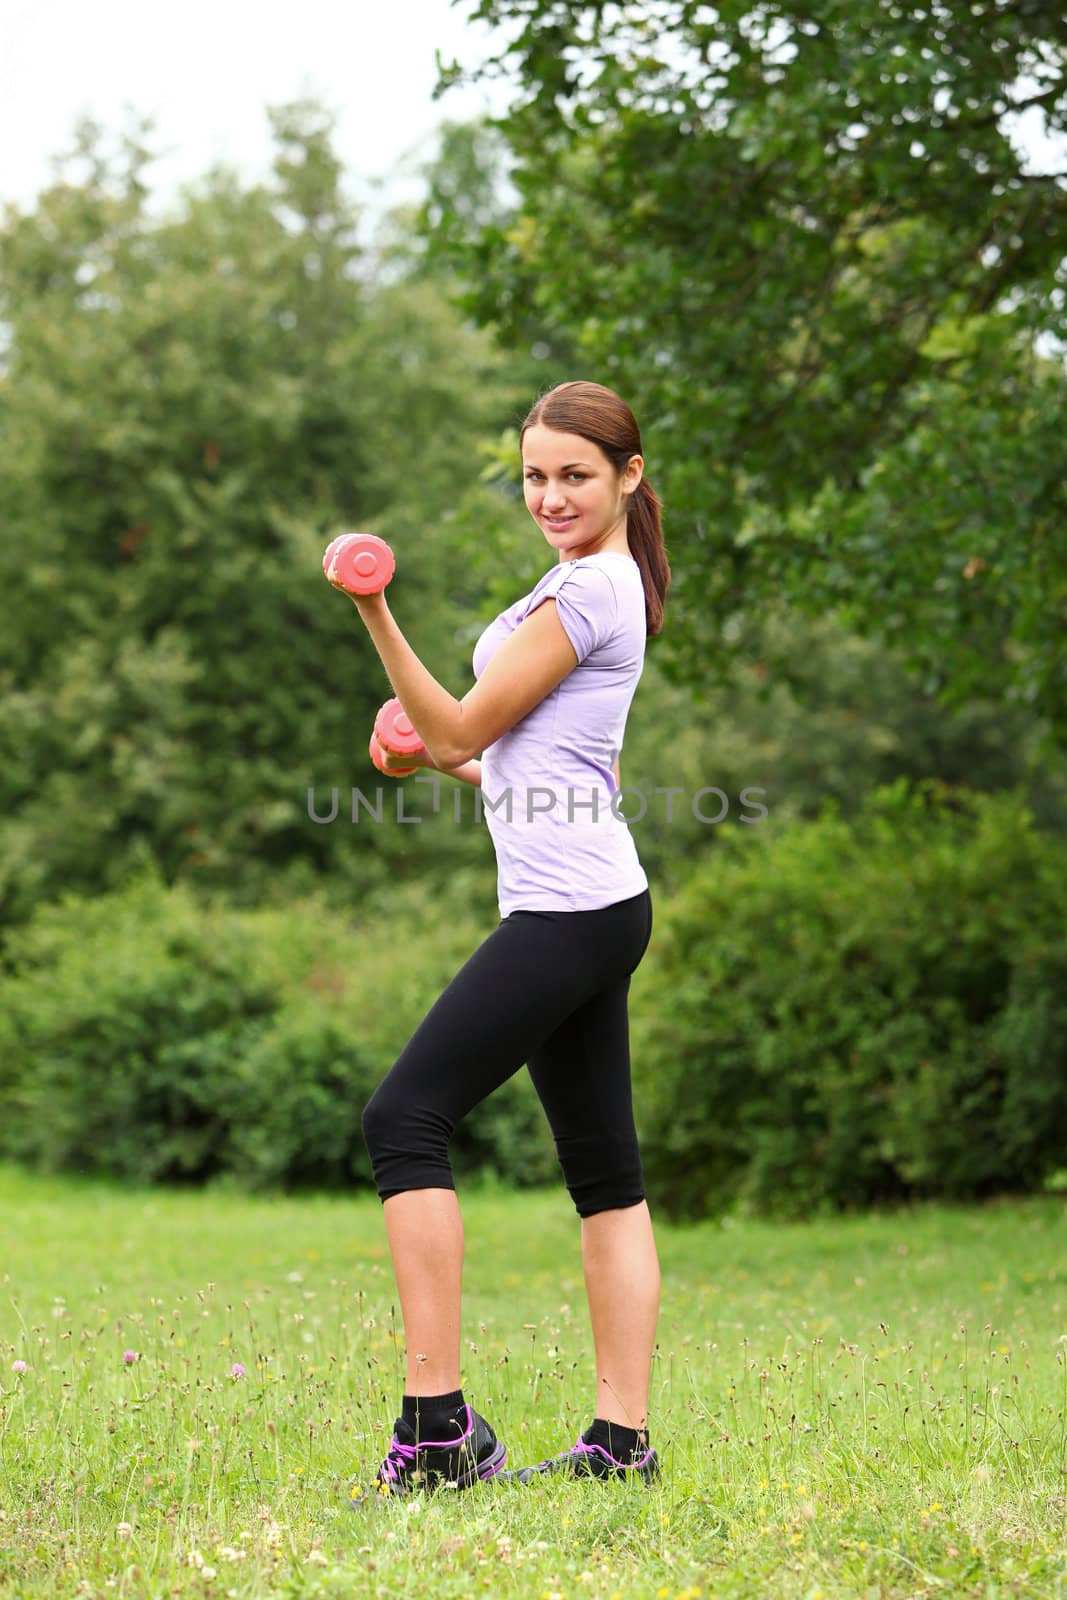 Young woman doing her fitness exercises with red dumbbells in the park